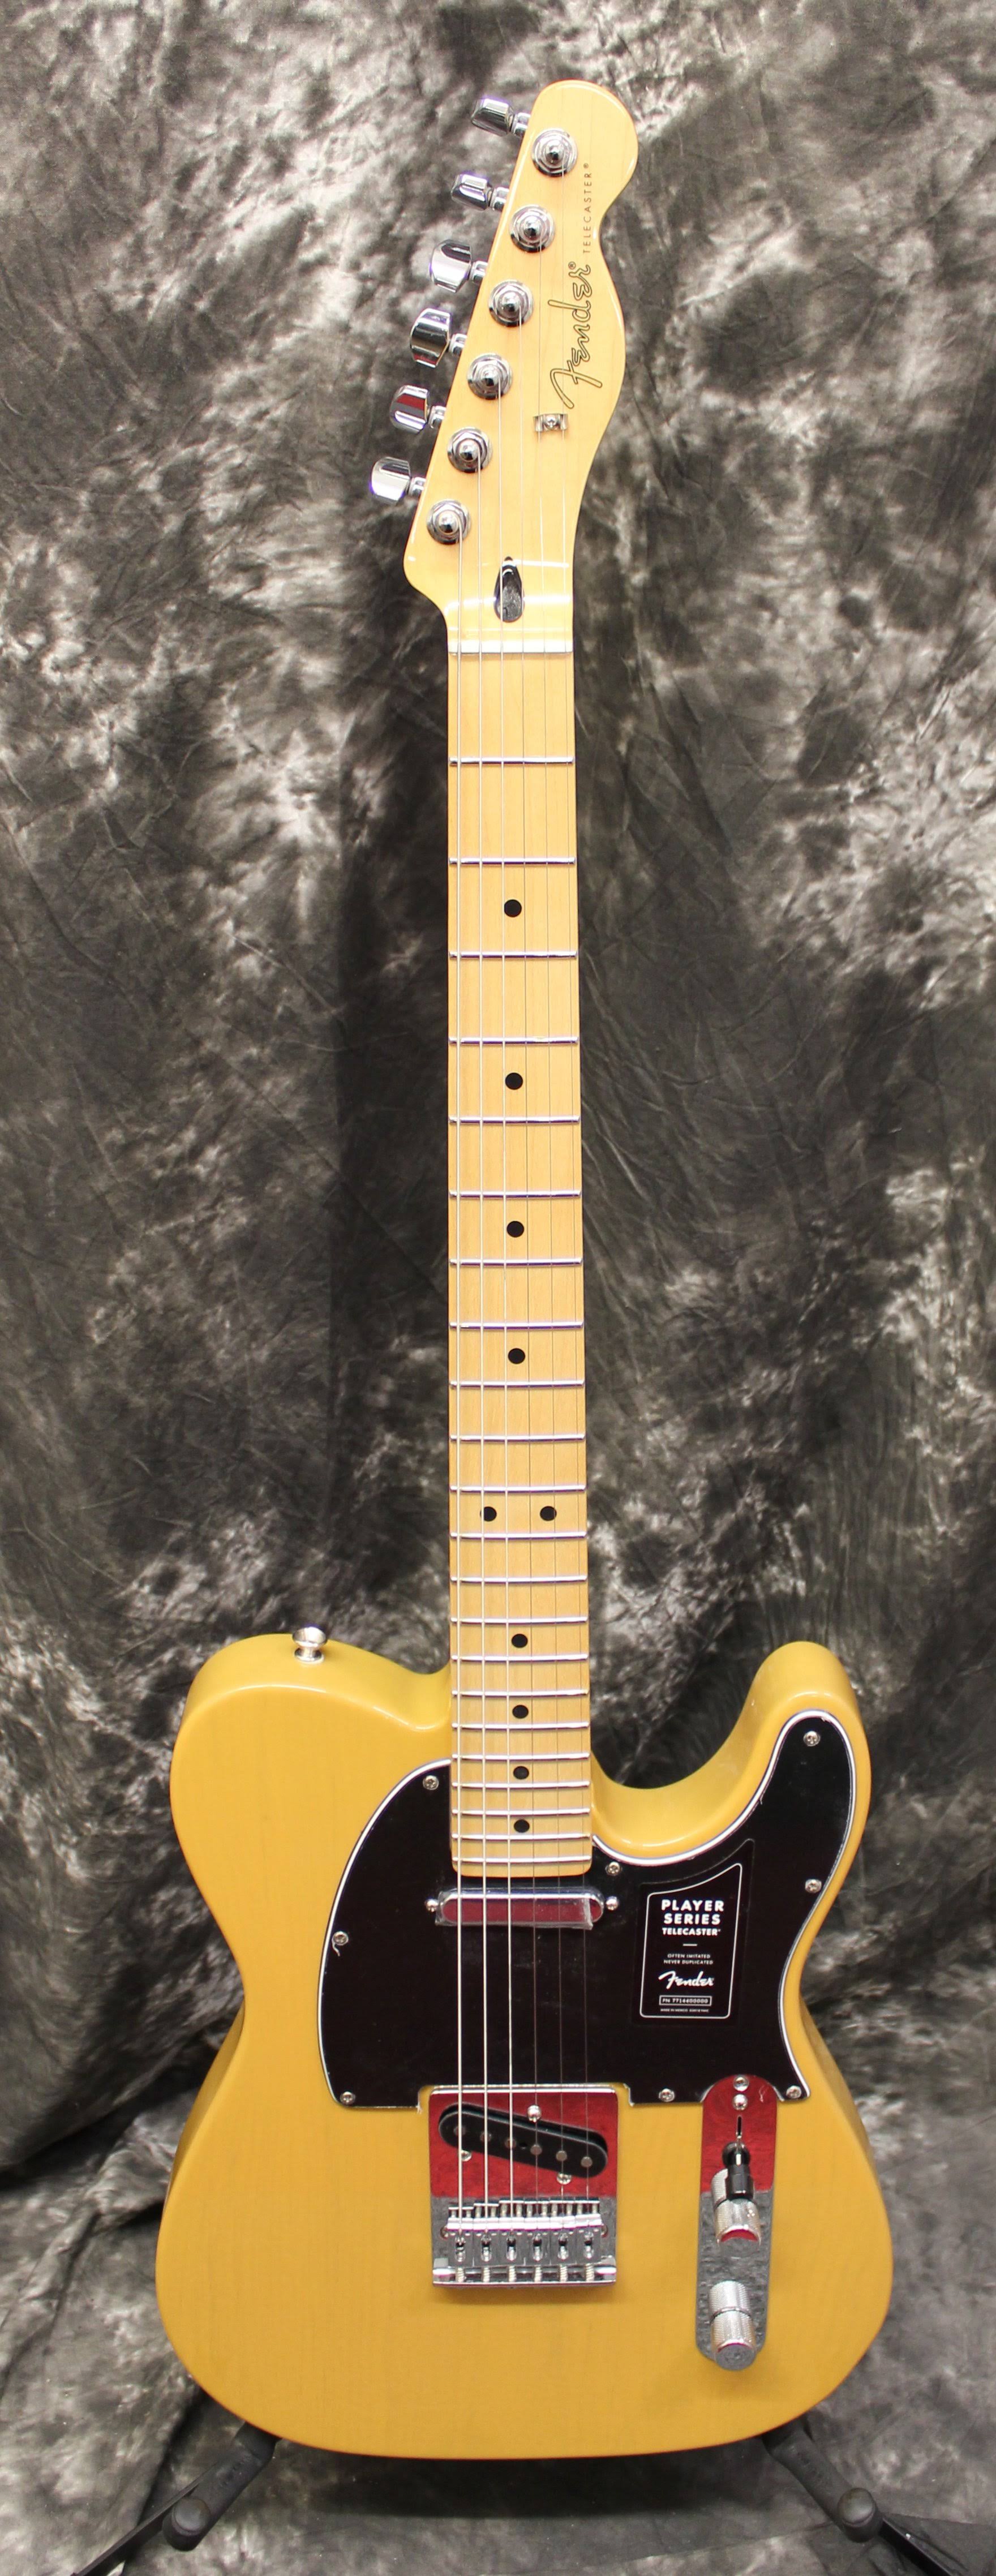 Fender Player Telecaster with Maple Fretboard Butterscotch Blonde